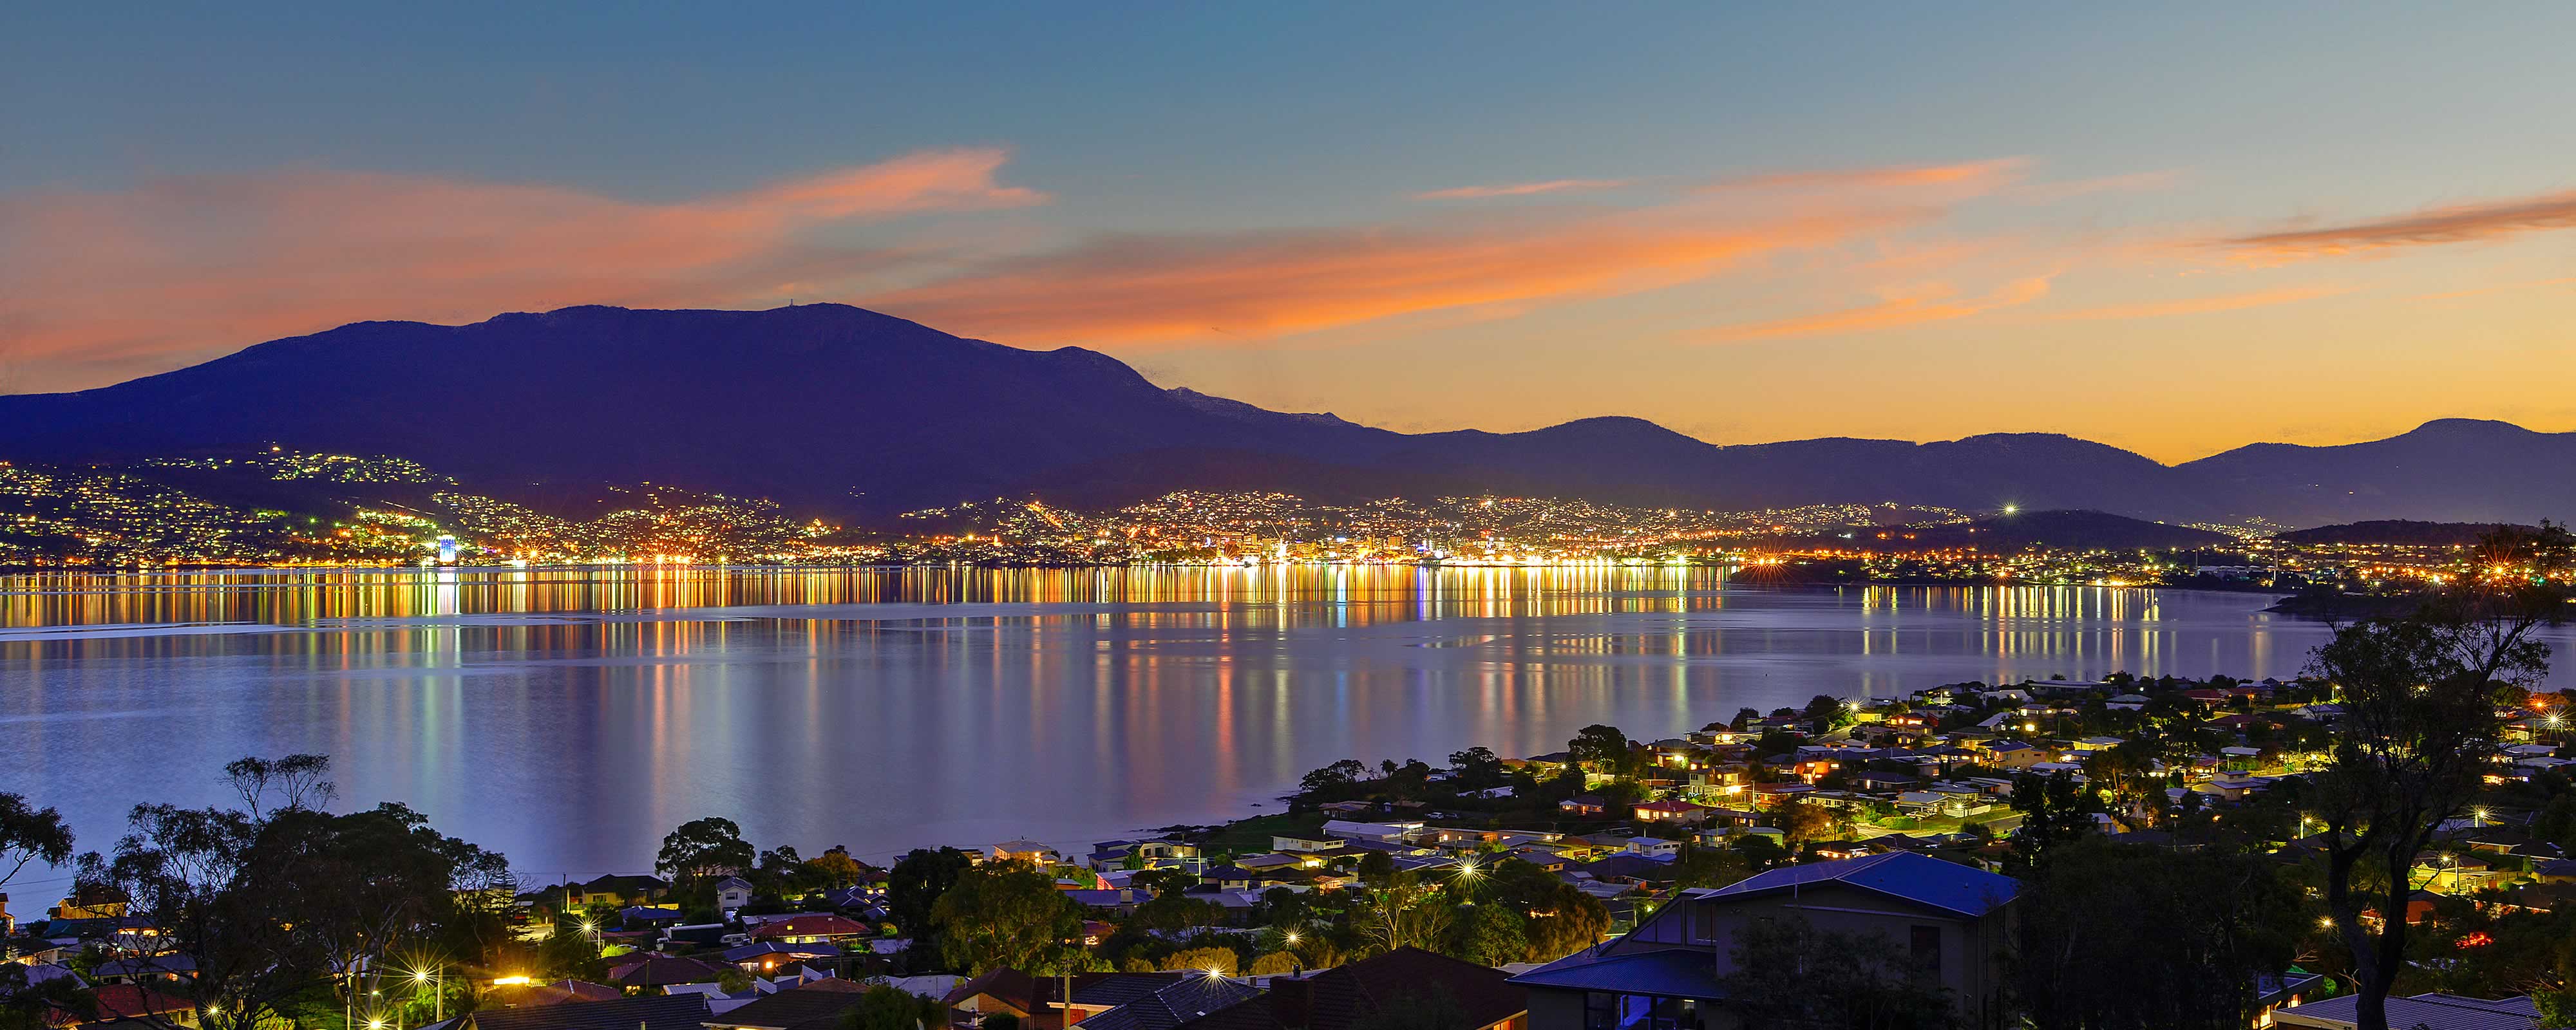 View from Tunah Street at night across the River Derwent, with the lights of Hobart and Sandy Bay reflected in the water and kunanyi / Mount Wellington in the distance. Photo: Owen Fielding.